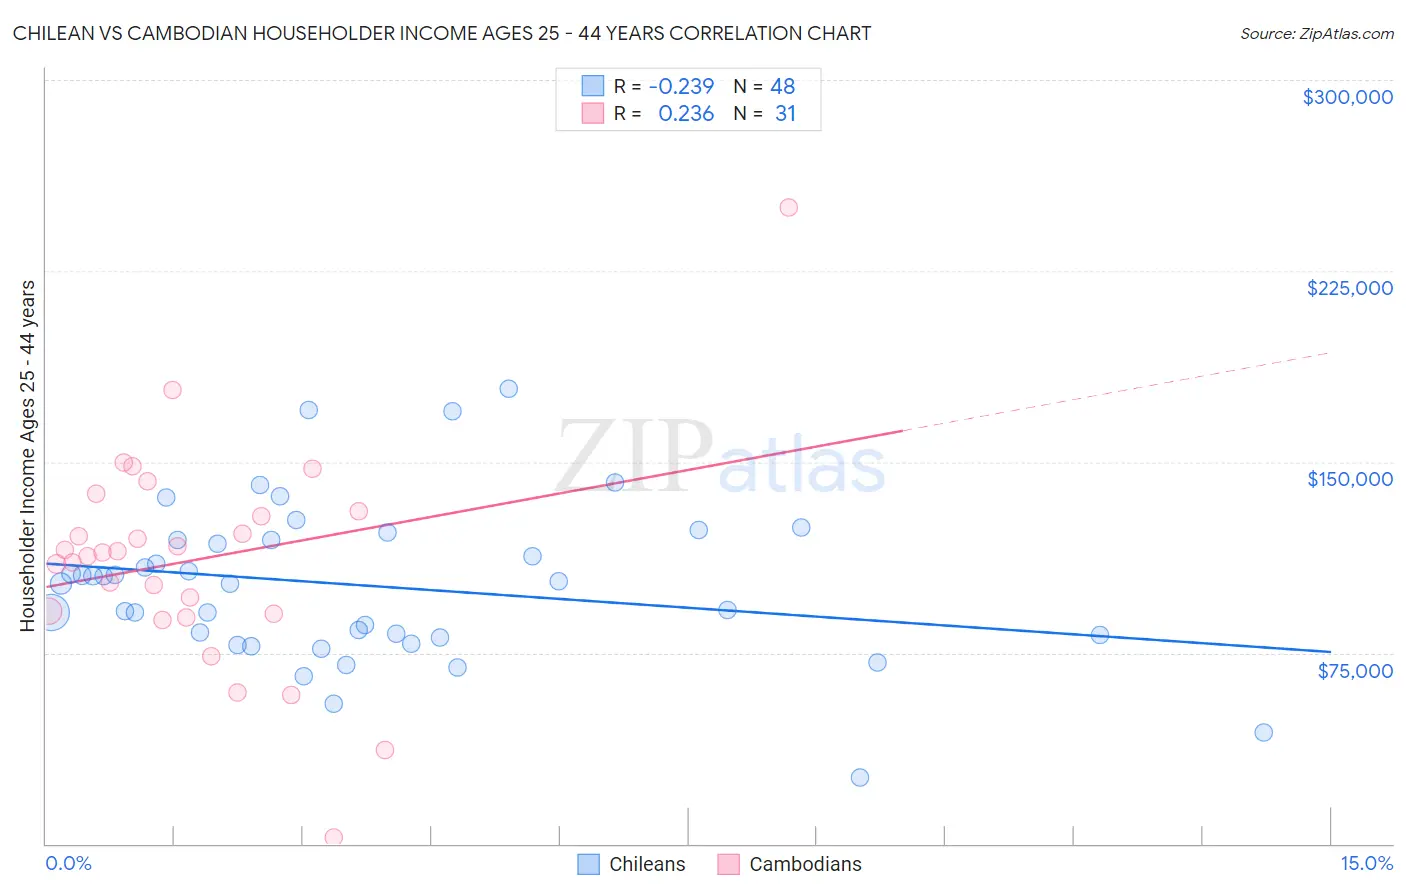 Chilean vs Cambodian Householder Income Ages 25 - 44 years